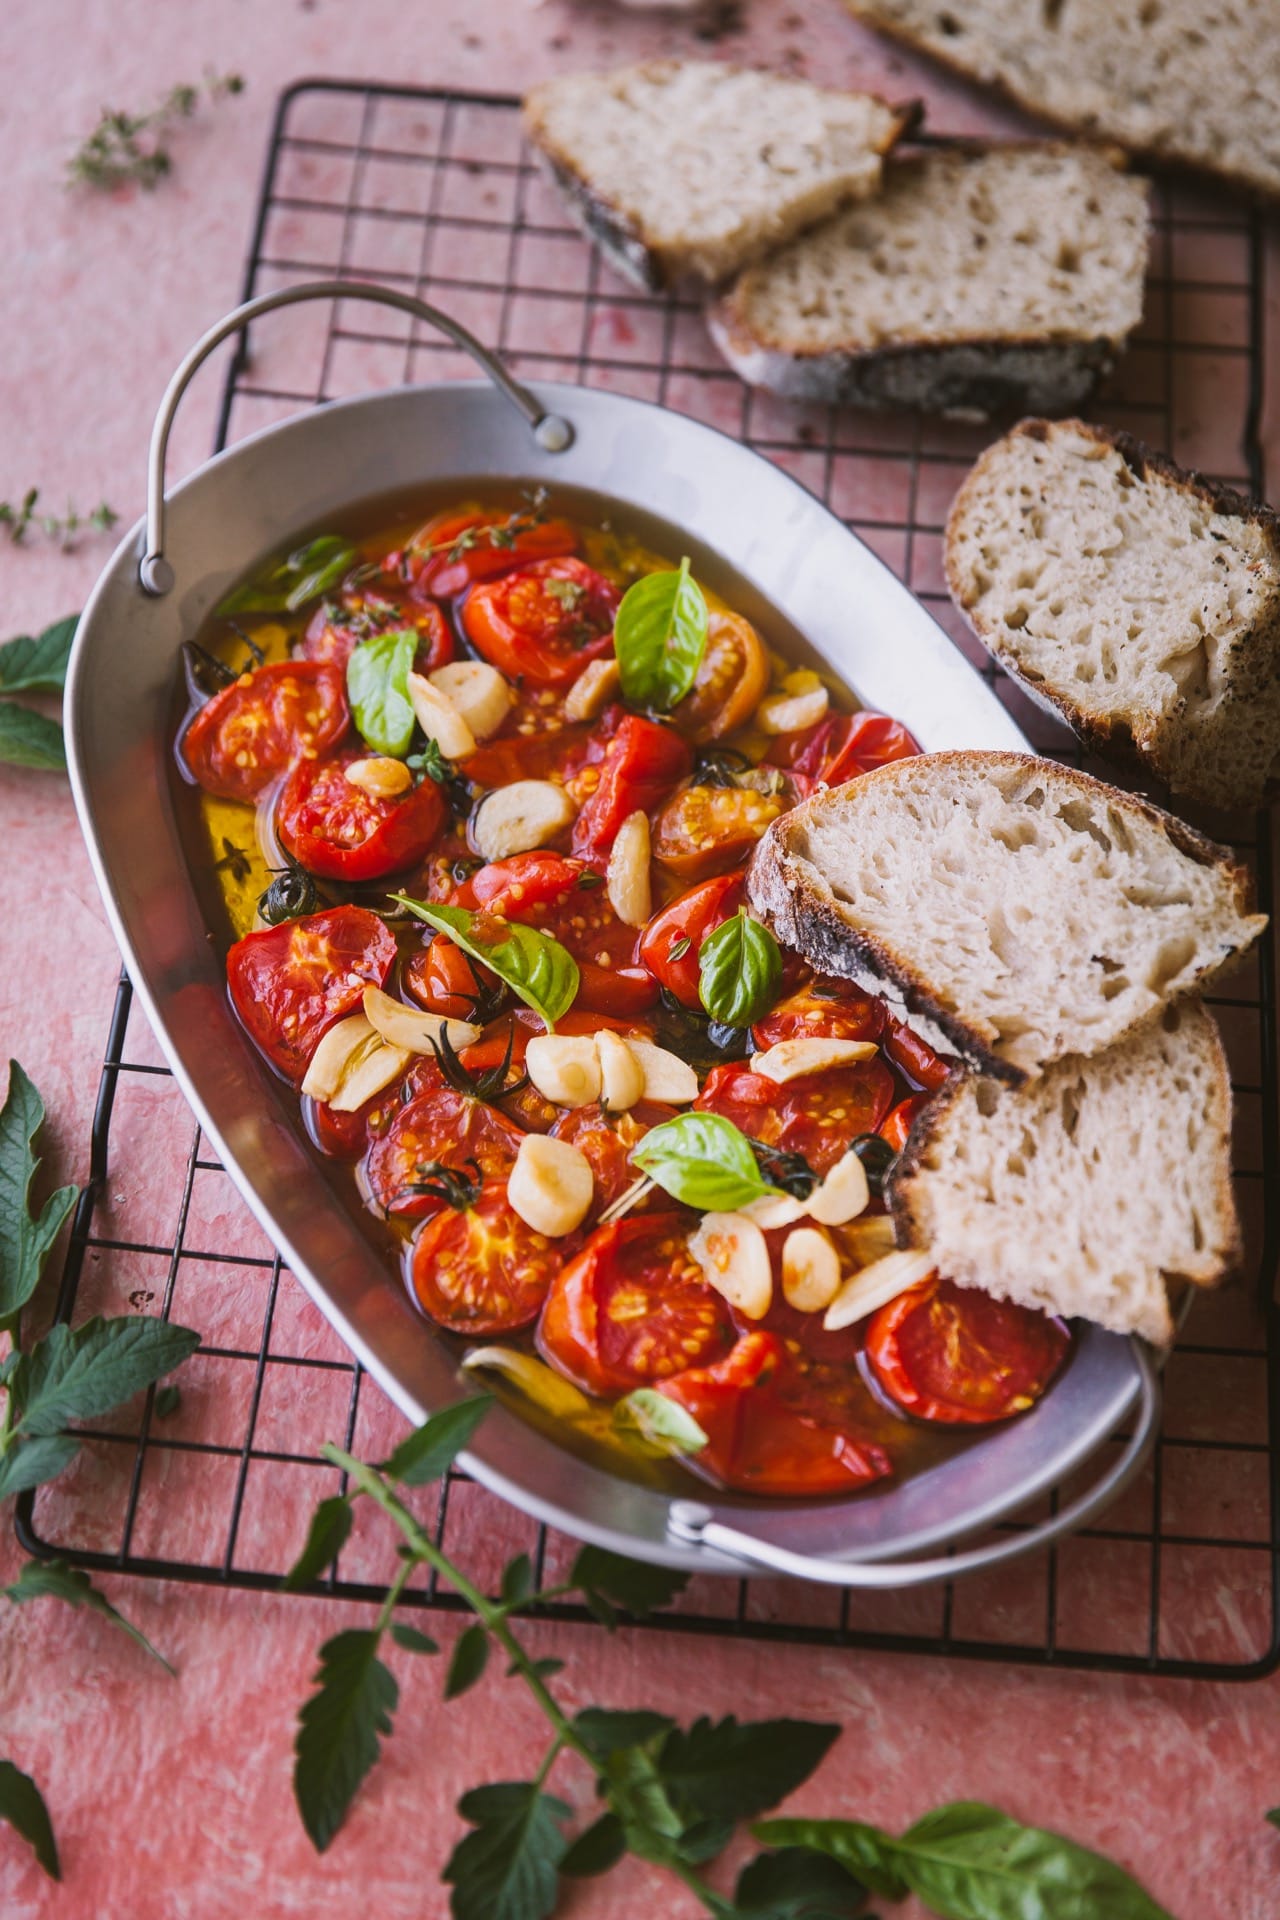 Tomato galic and basil on a tray with oil topped with two slices of bread and few bread slices are kept on the side